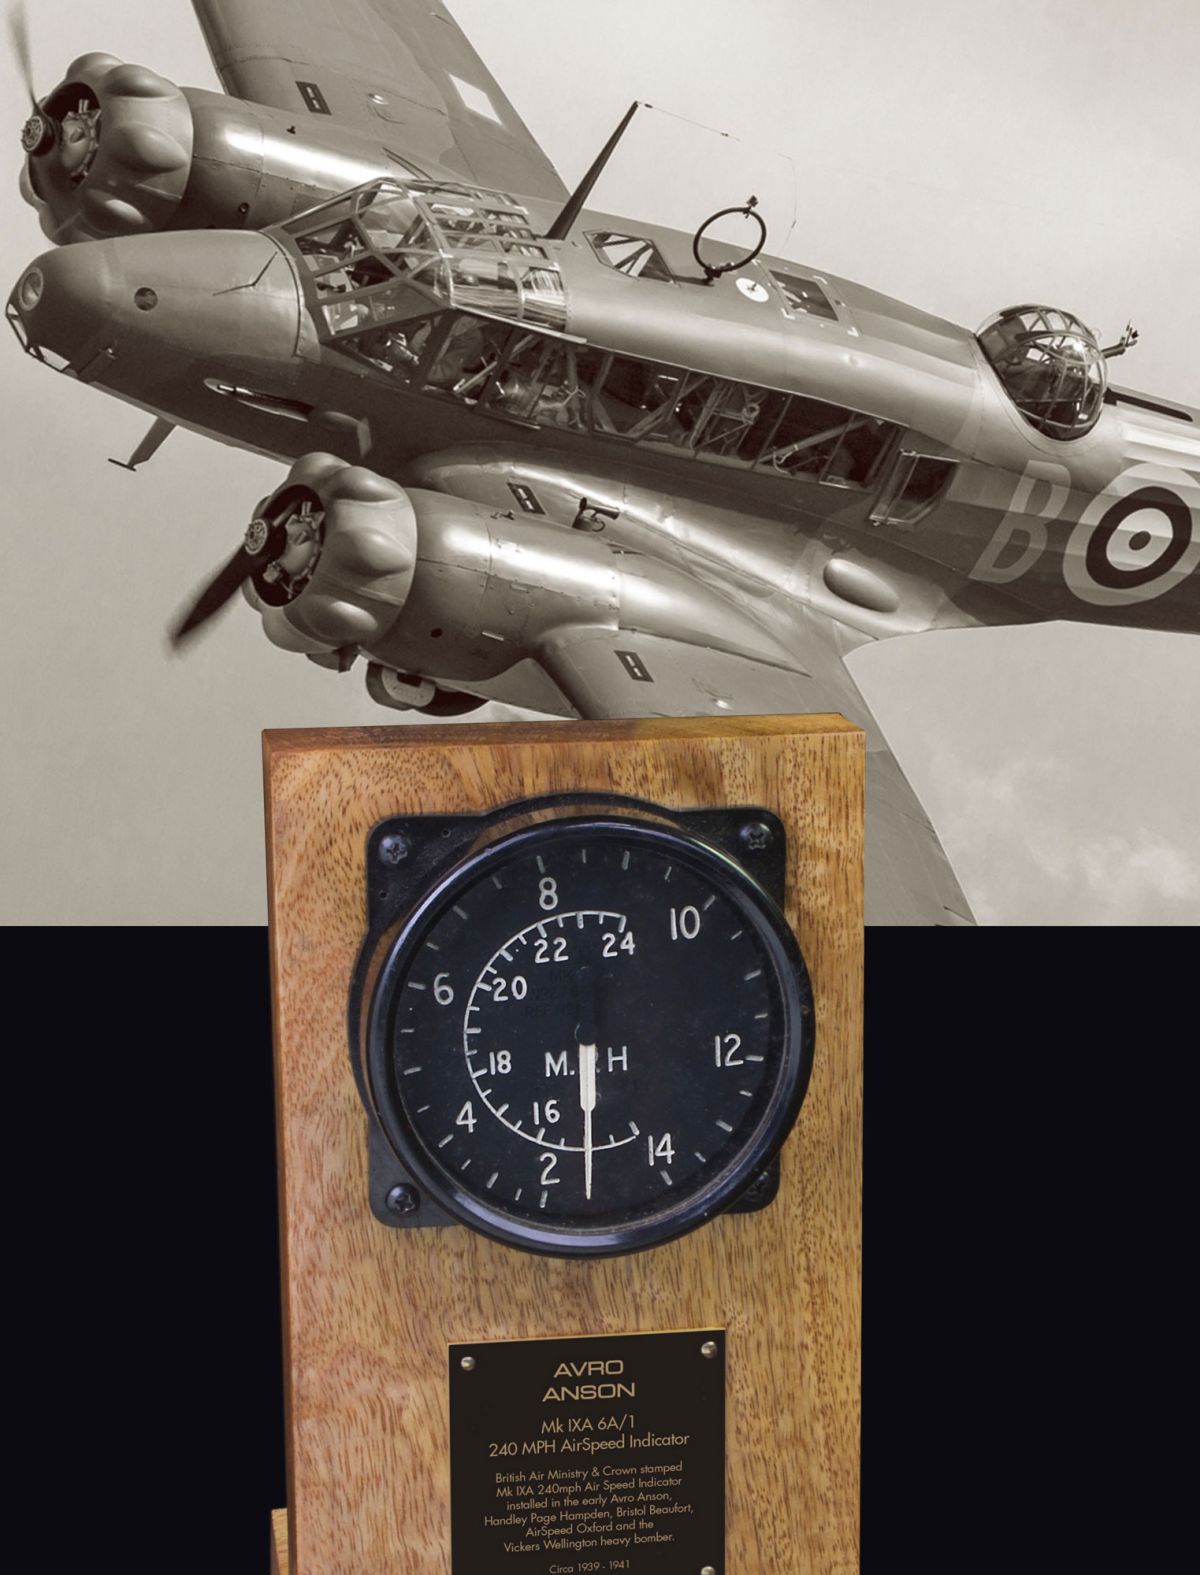 AVRO ANSON AIR MINISTRY 240 MPH AIRSPEED INDICATOR